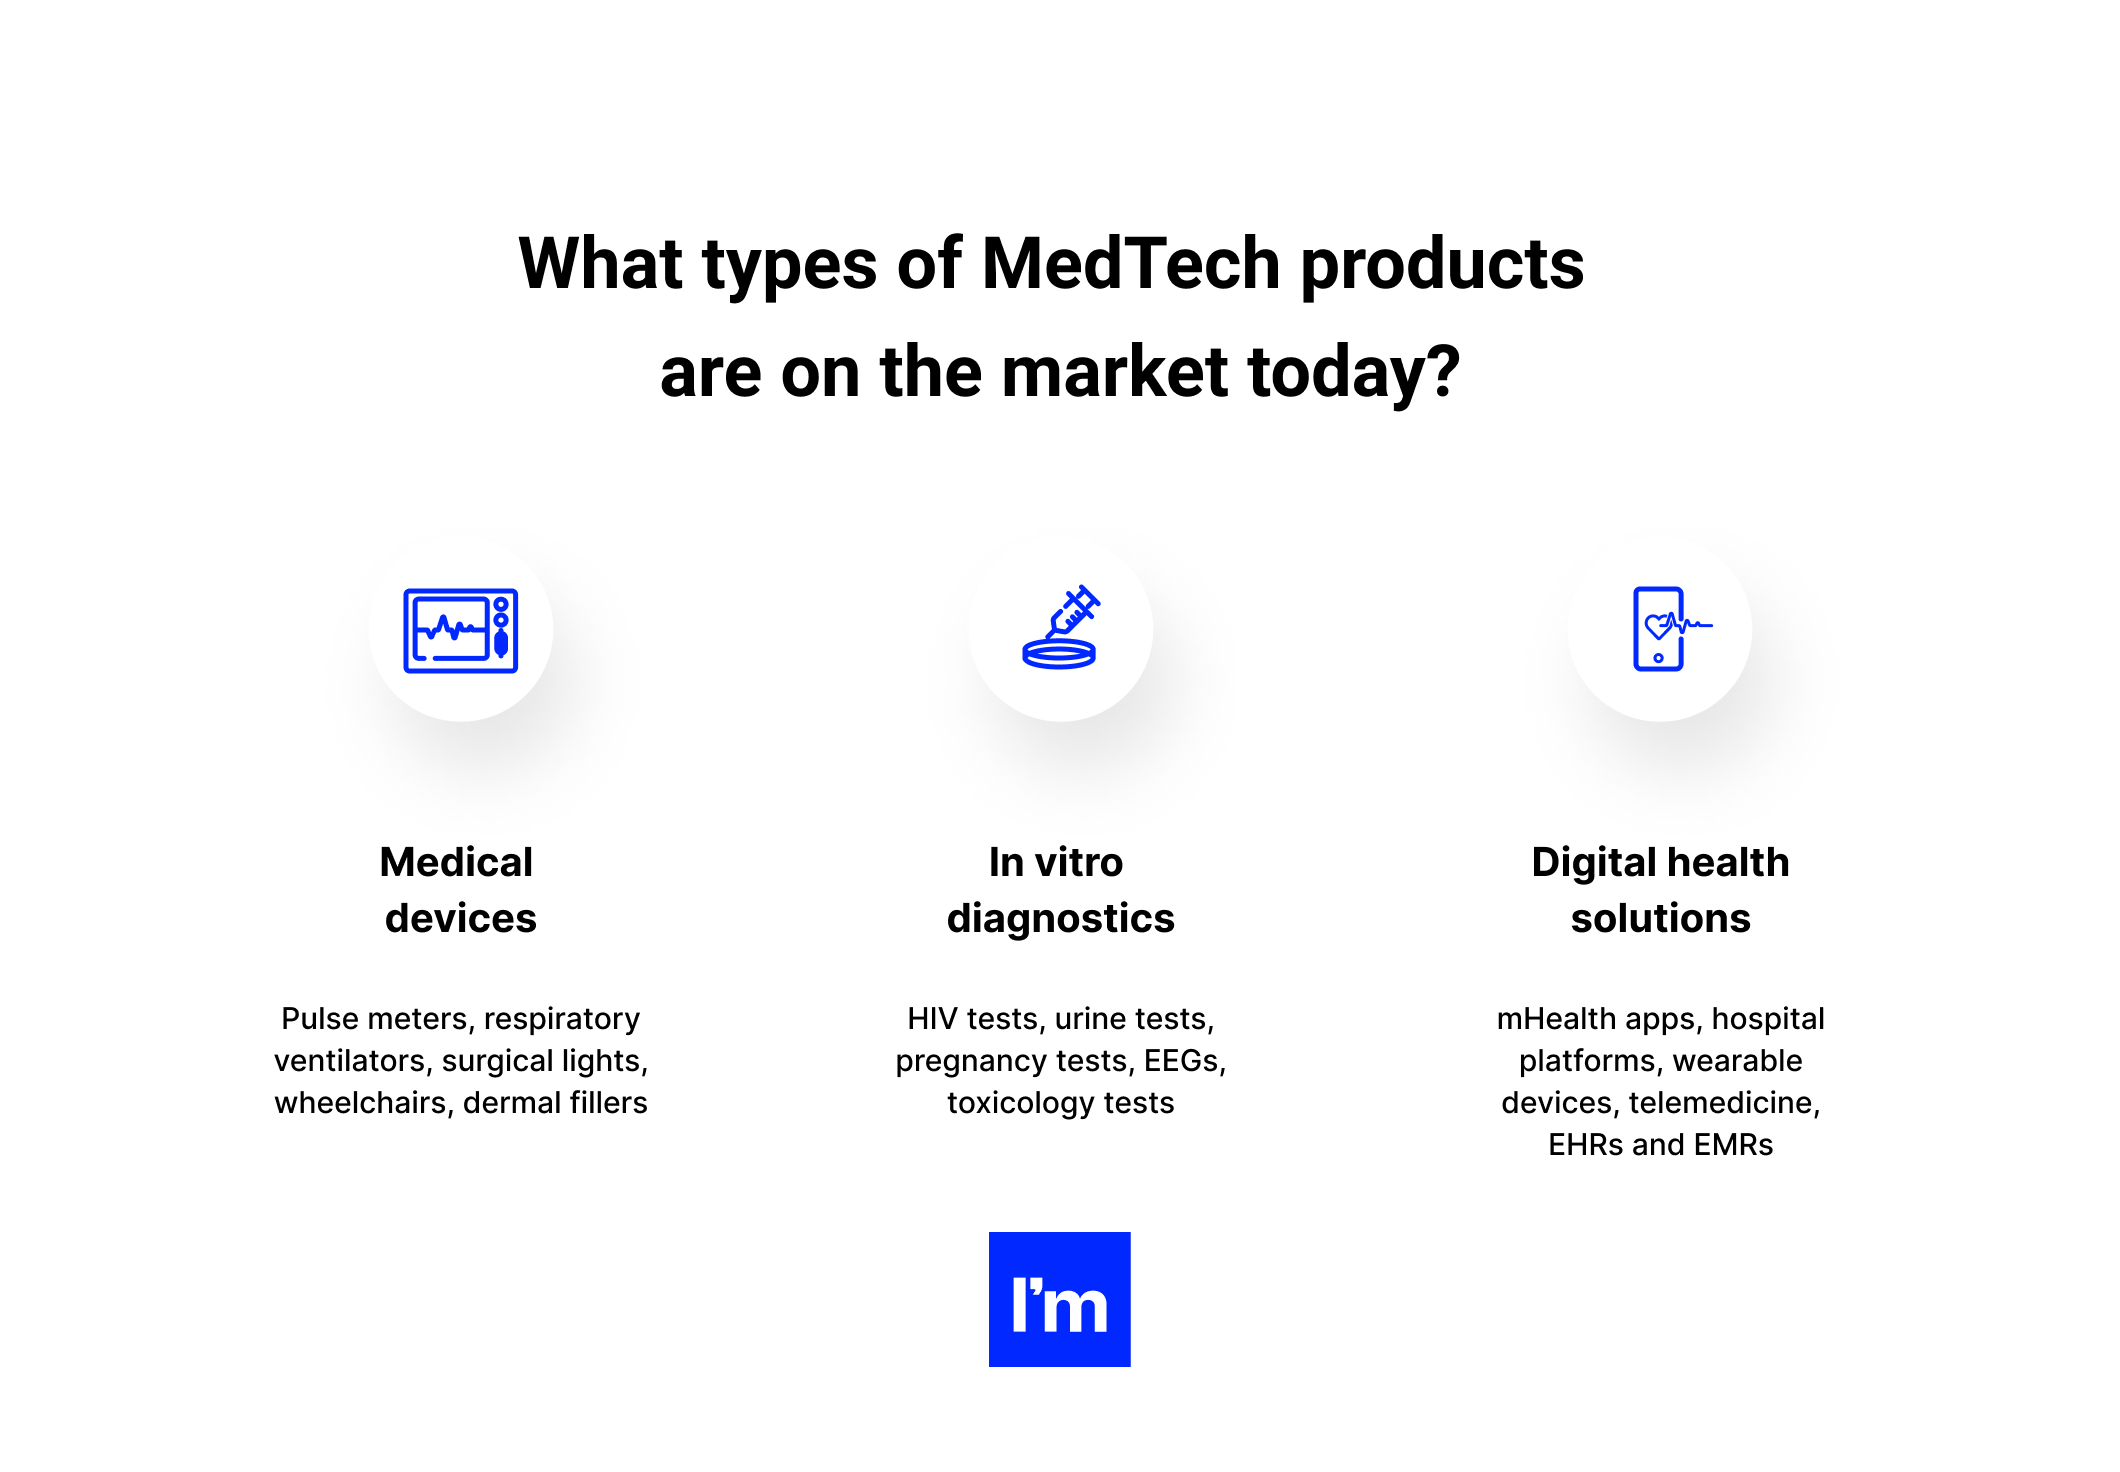 20 Examples of MedTech - infographic 1